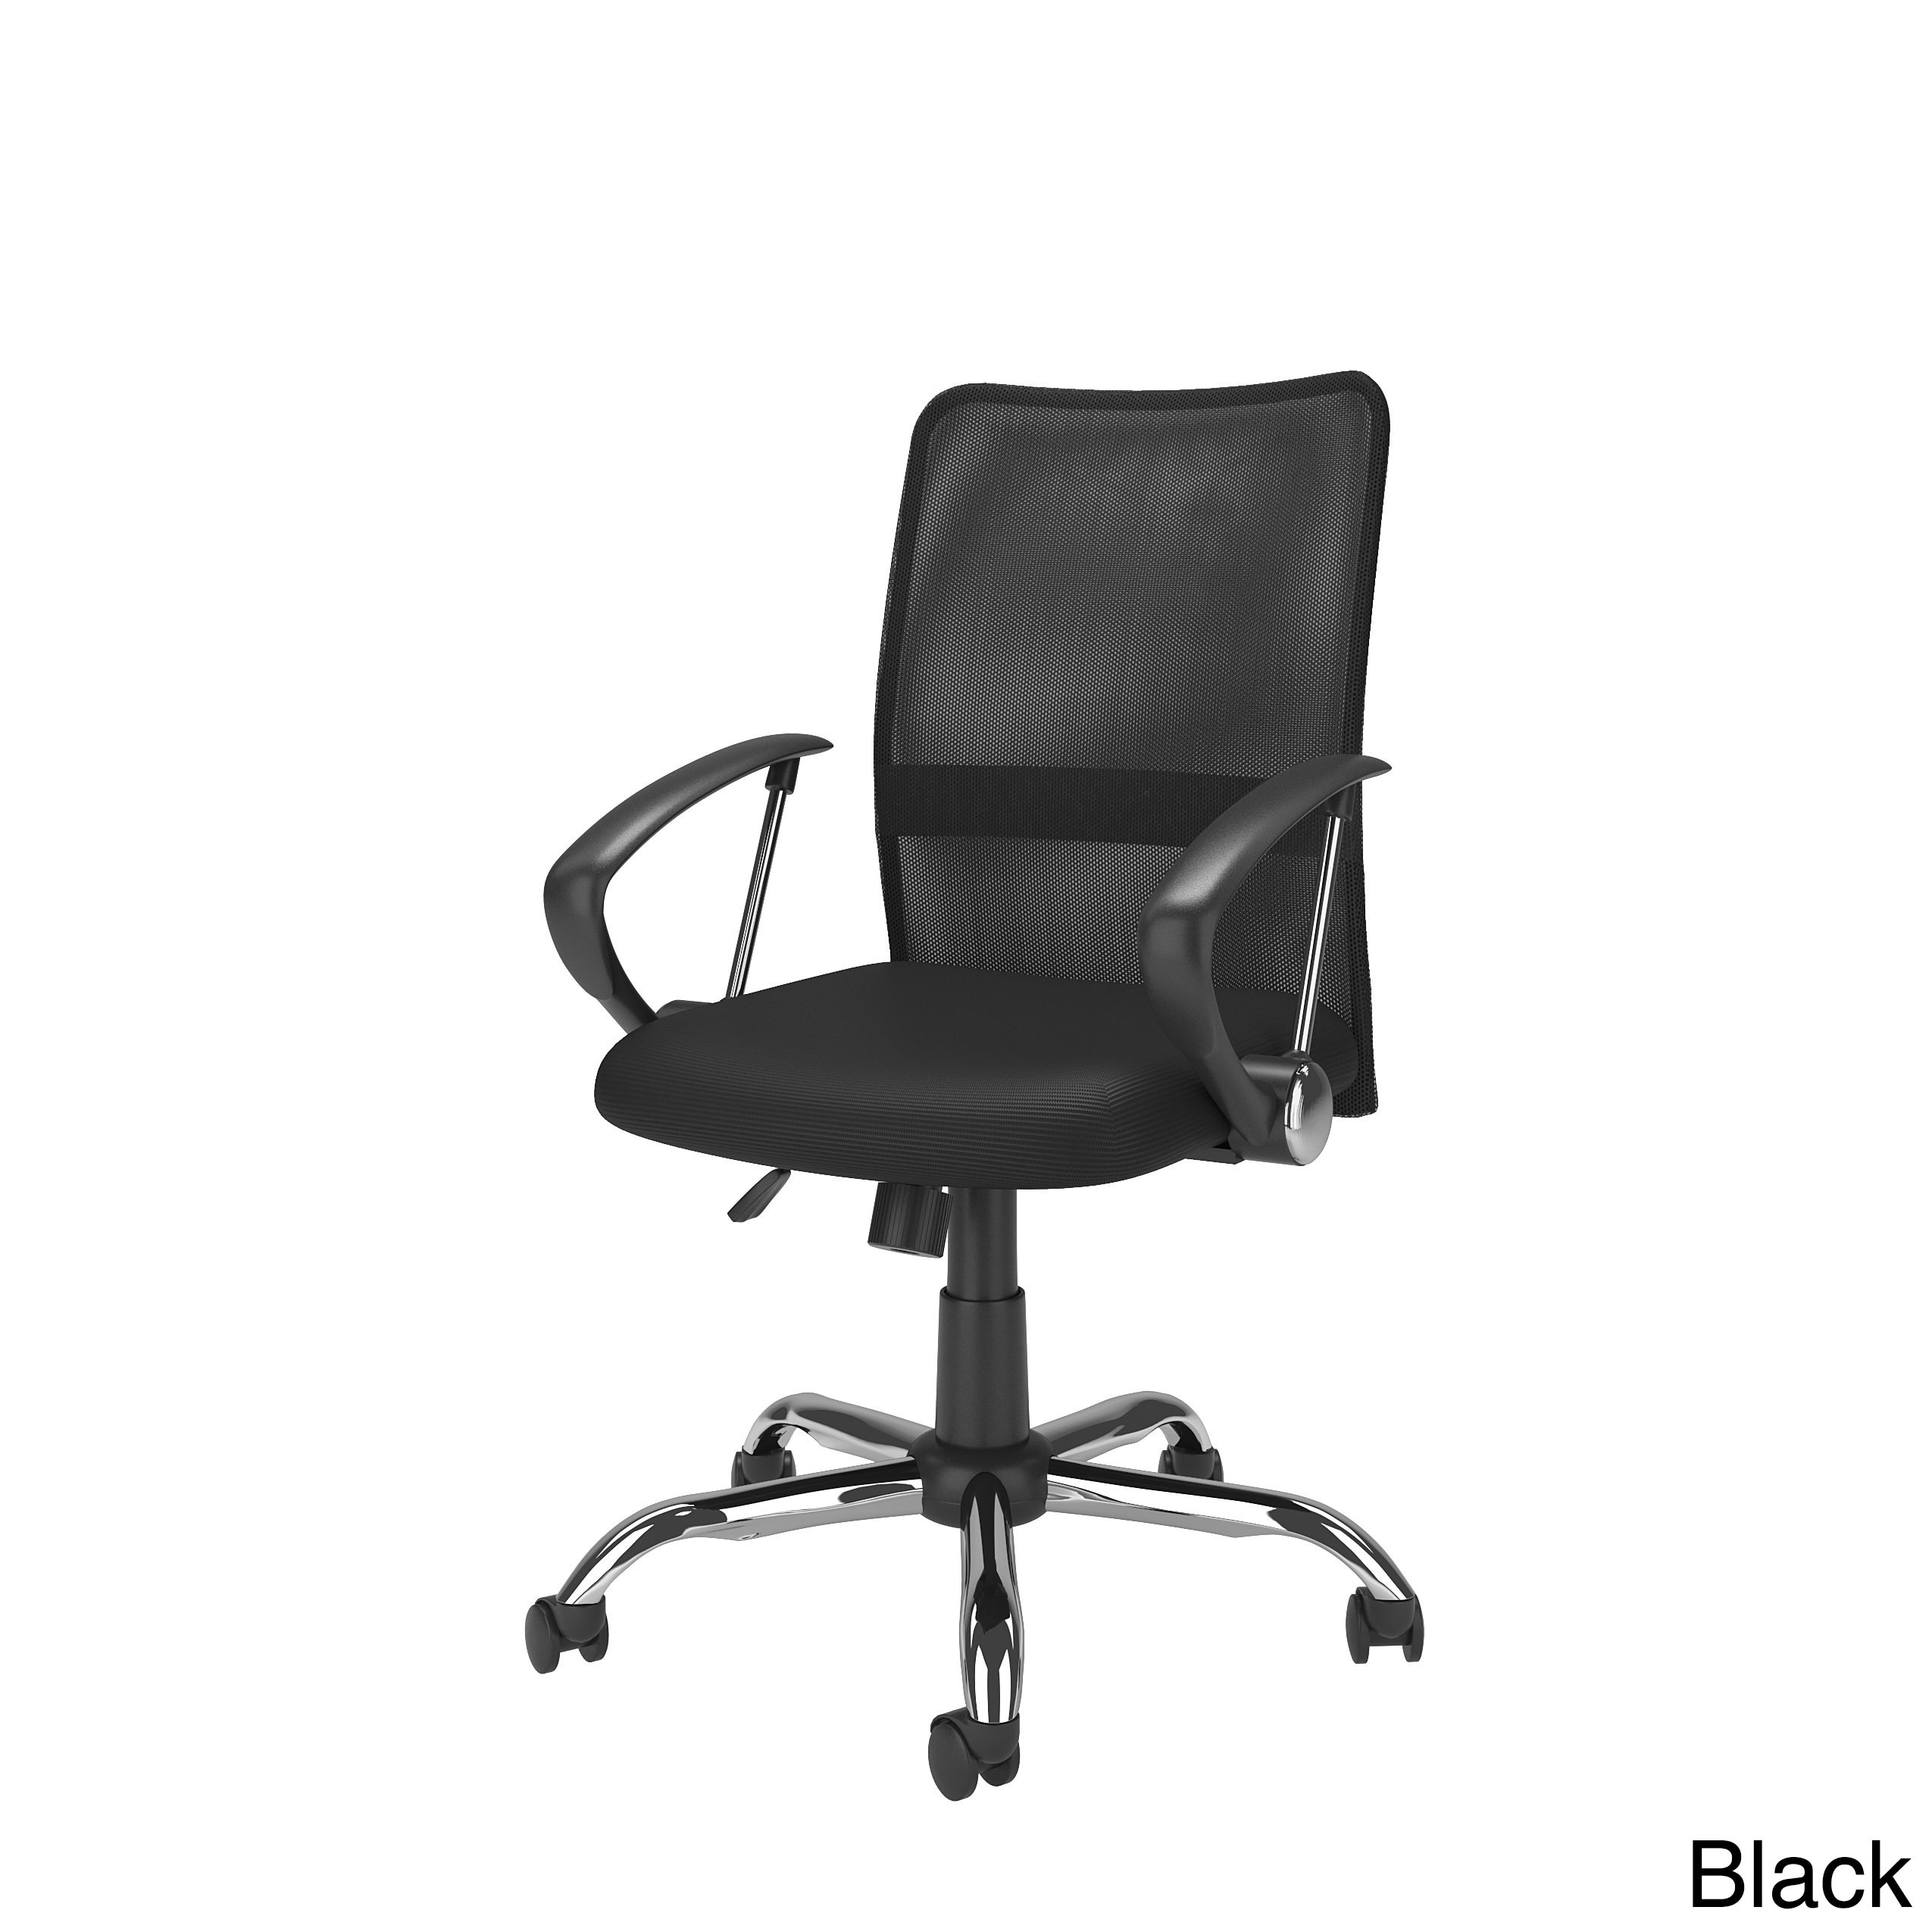 Porch and Den Oakwood Contoured Mesh Back Office Chair